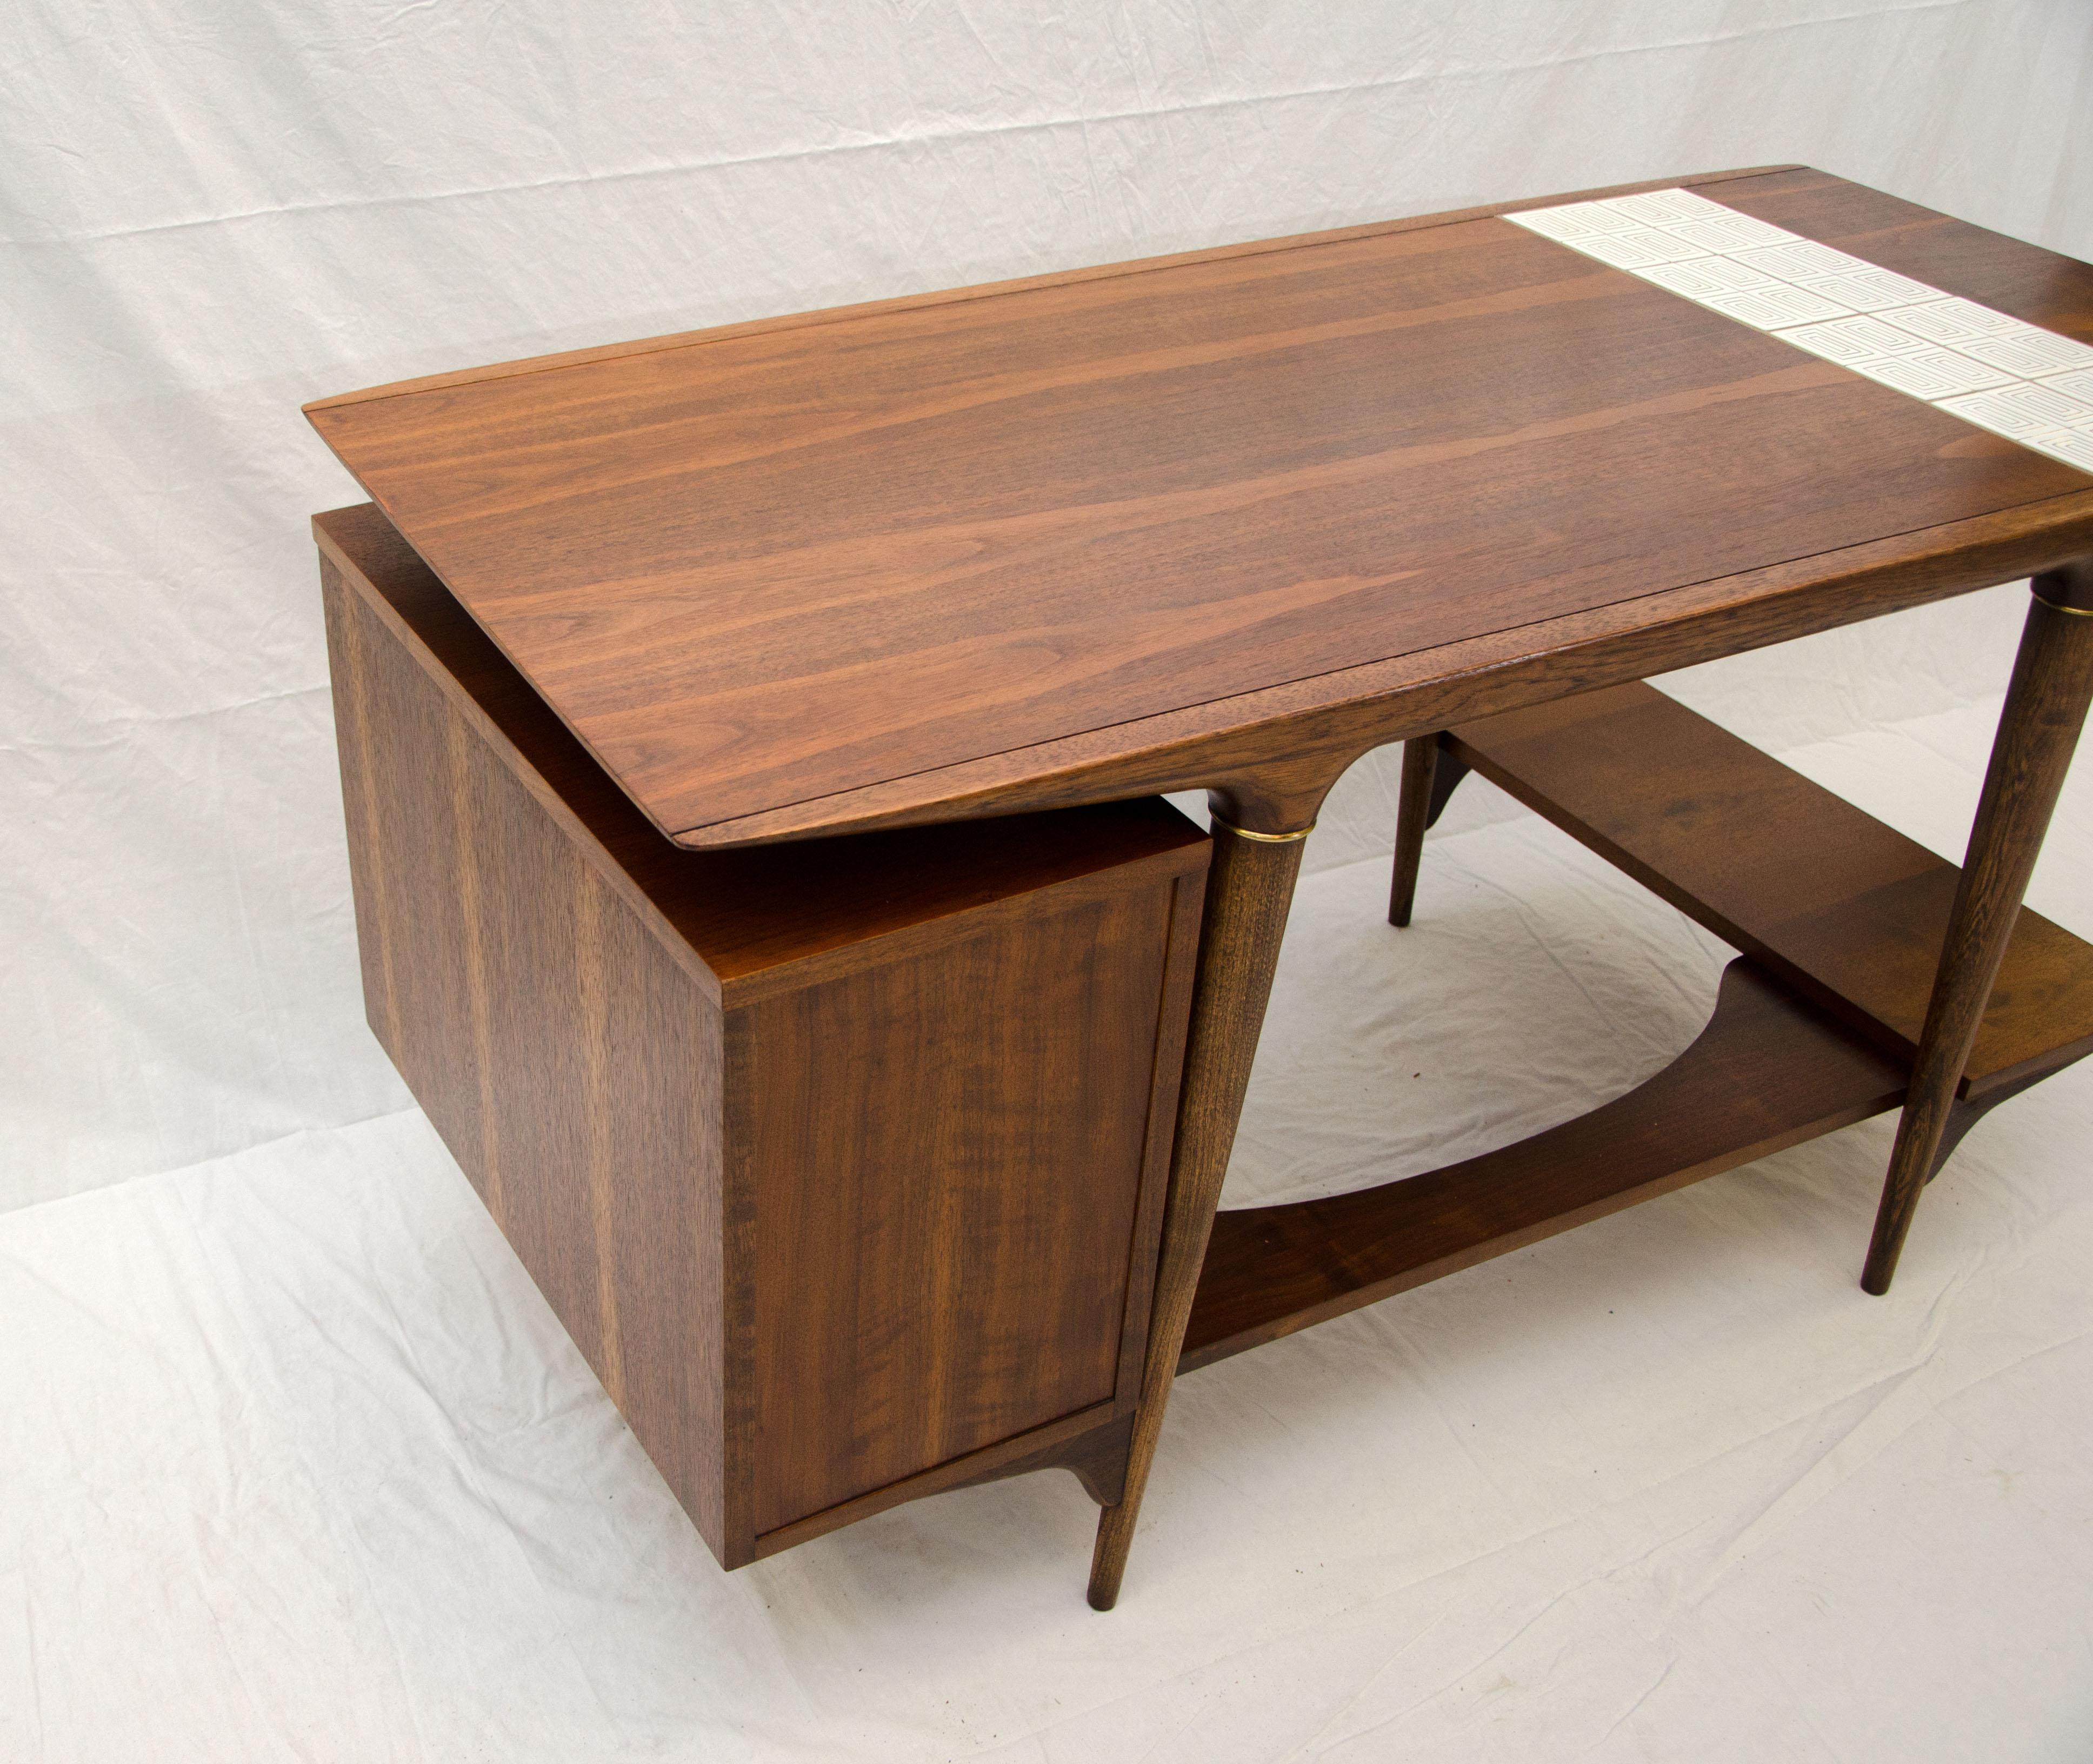 20th Century Unusual Mid Century Desk by Lane, with Floating Drawer Cabinet & Tile Insert